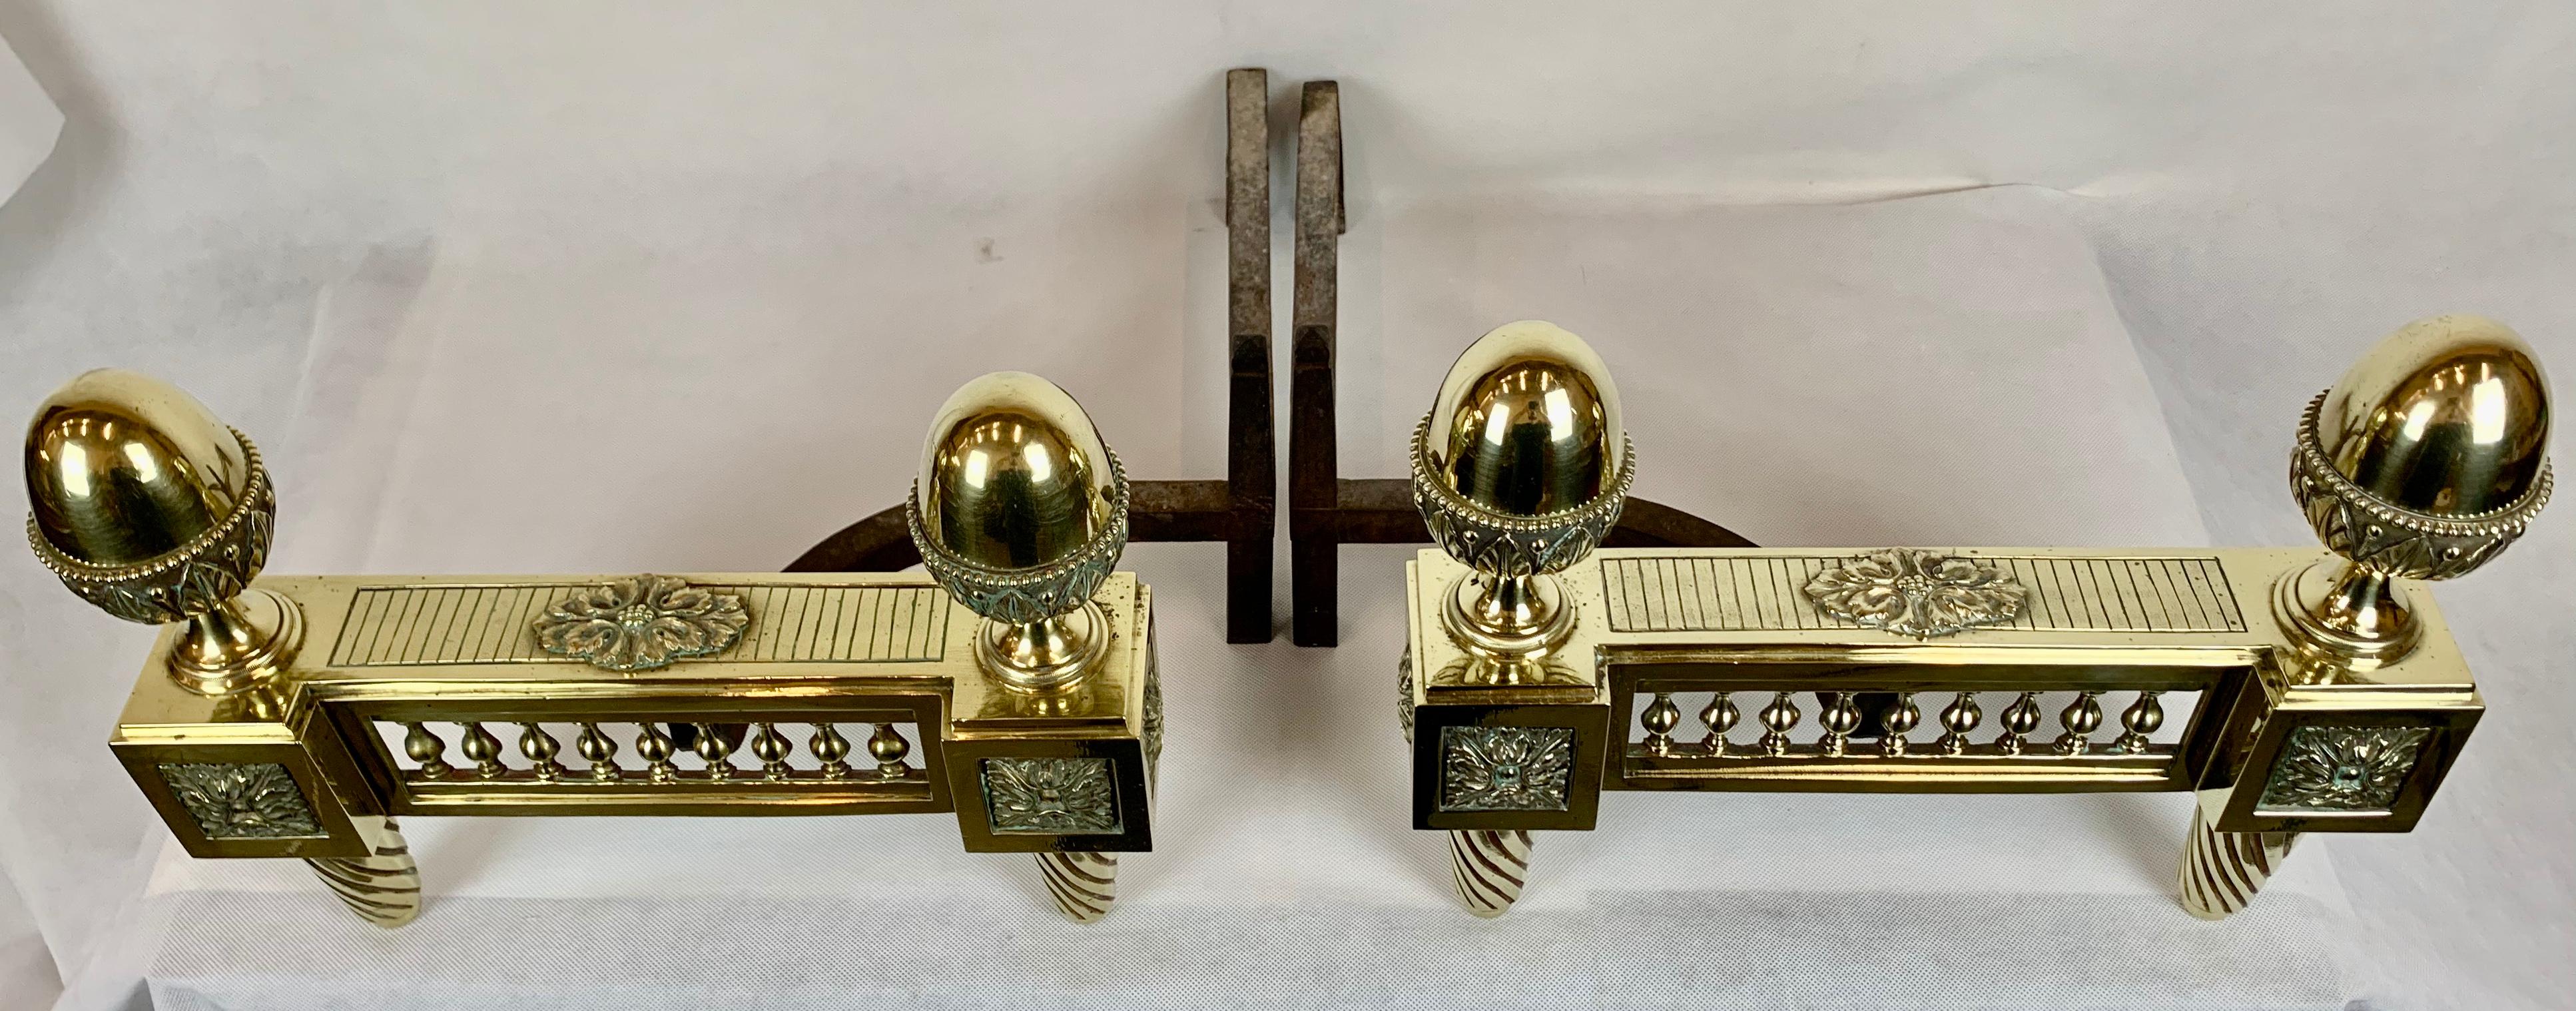 Hand-Crafted Golden Bronze Andirons, Louis XVI Style, France, 19th c. For Sale